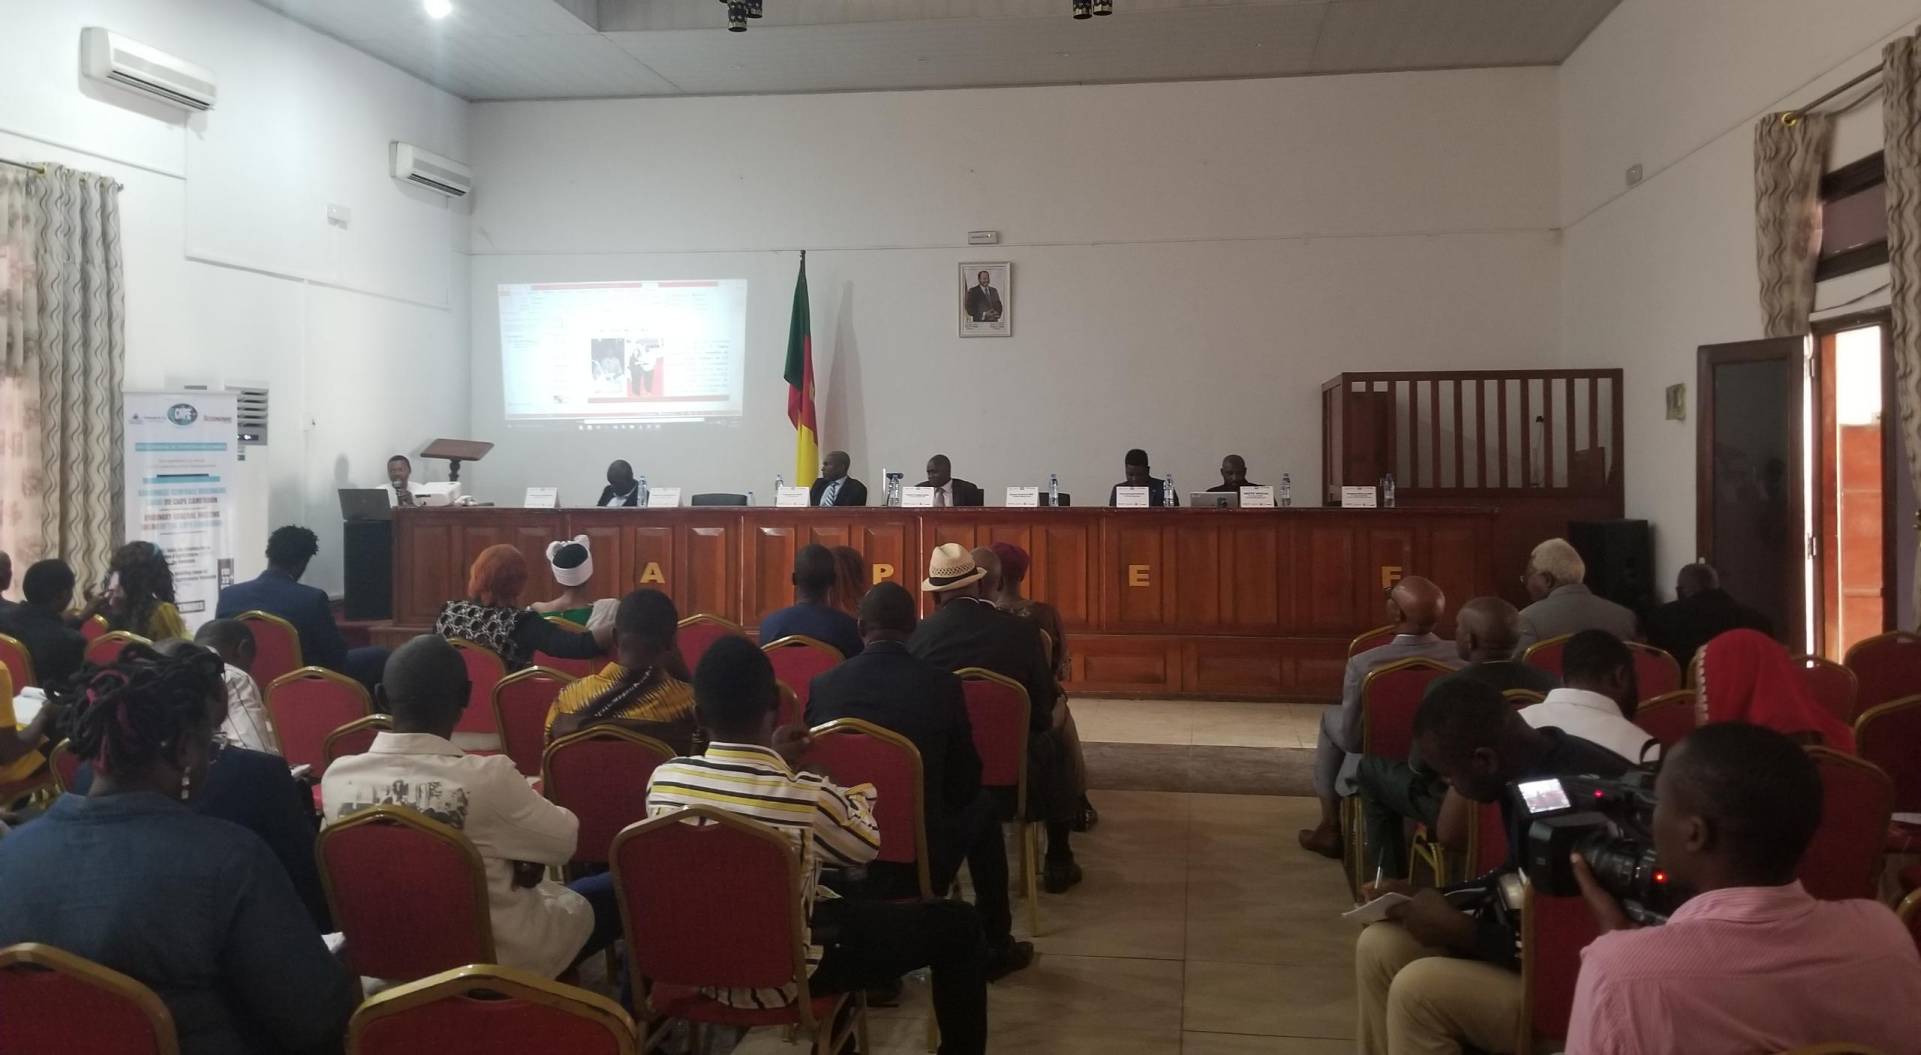 CNPE CAMEROON ORDINARY GENERAL ASSEMBLY (OGA), A USA business opportunity for Cameroonian SMEs